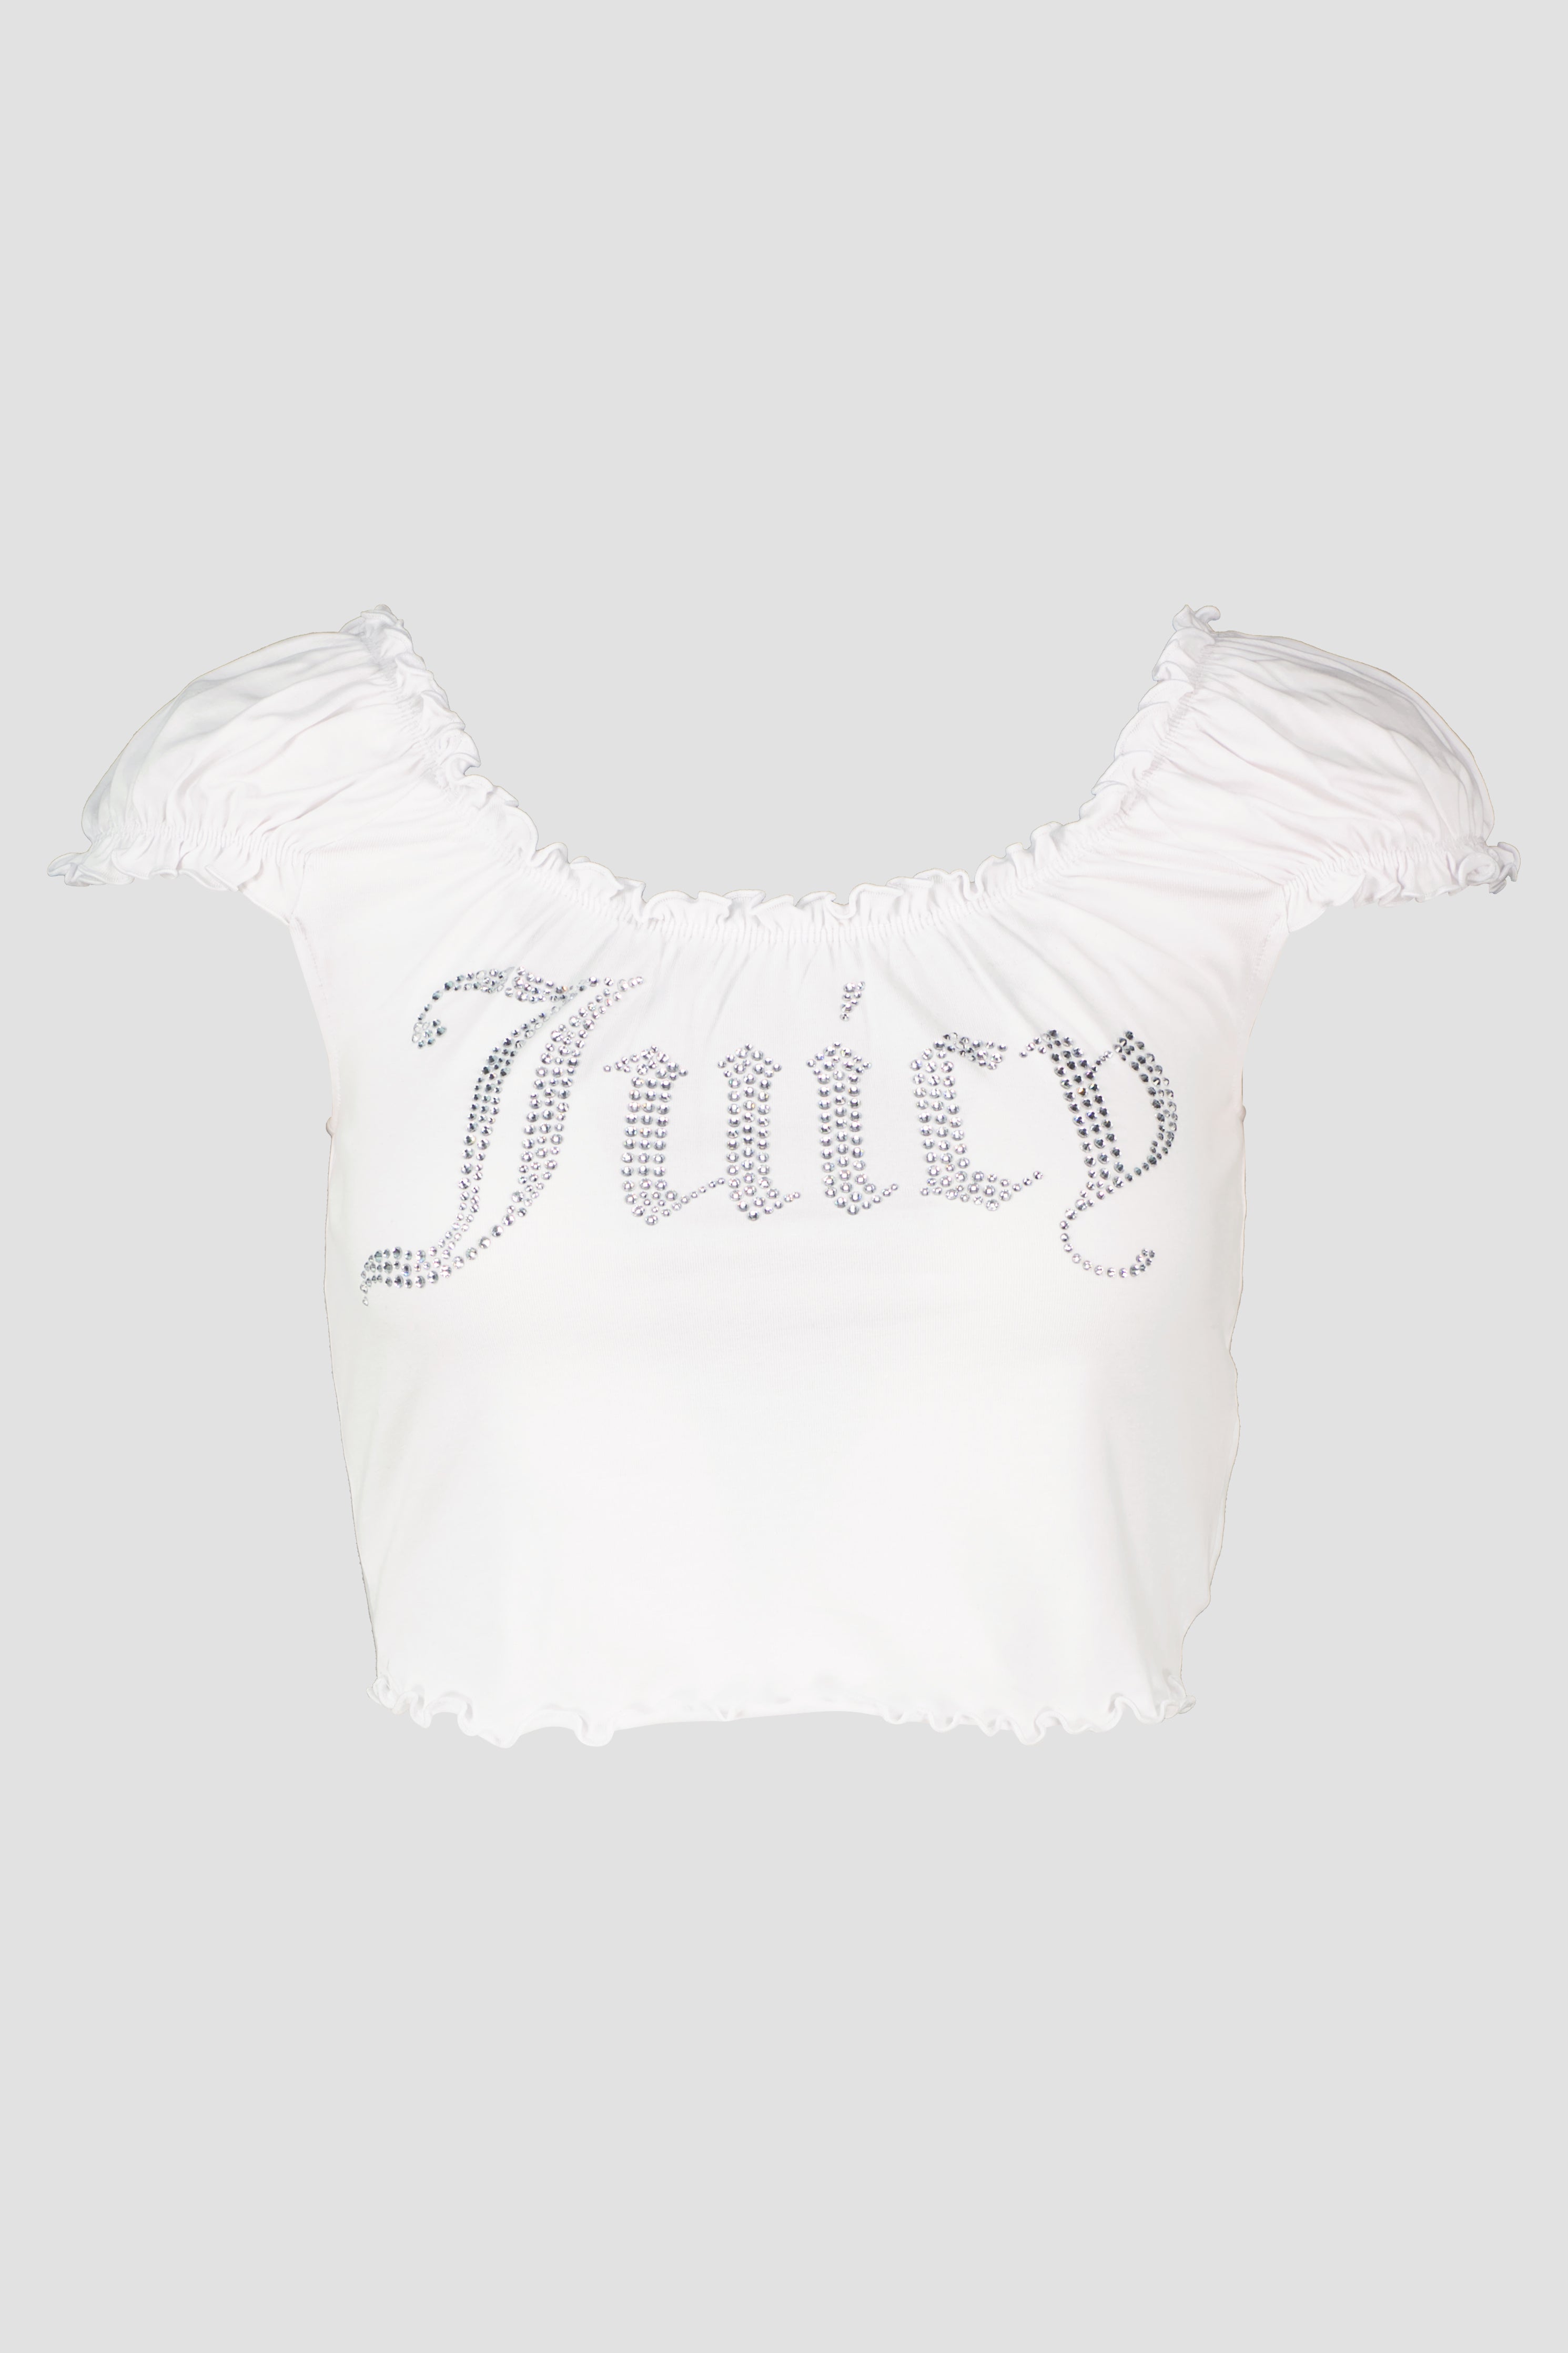 Women's Juicy Couture Brodie Lettuce White Tank T Shirt